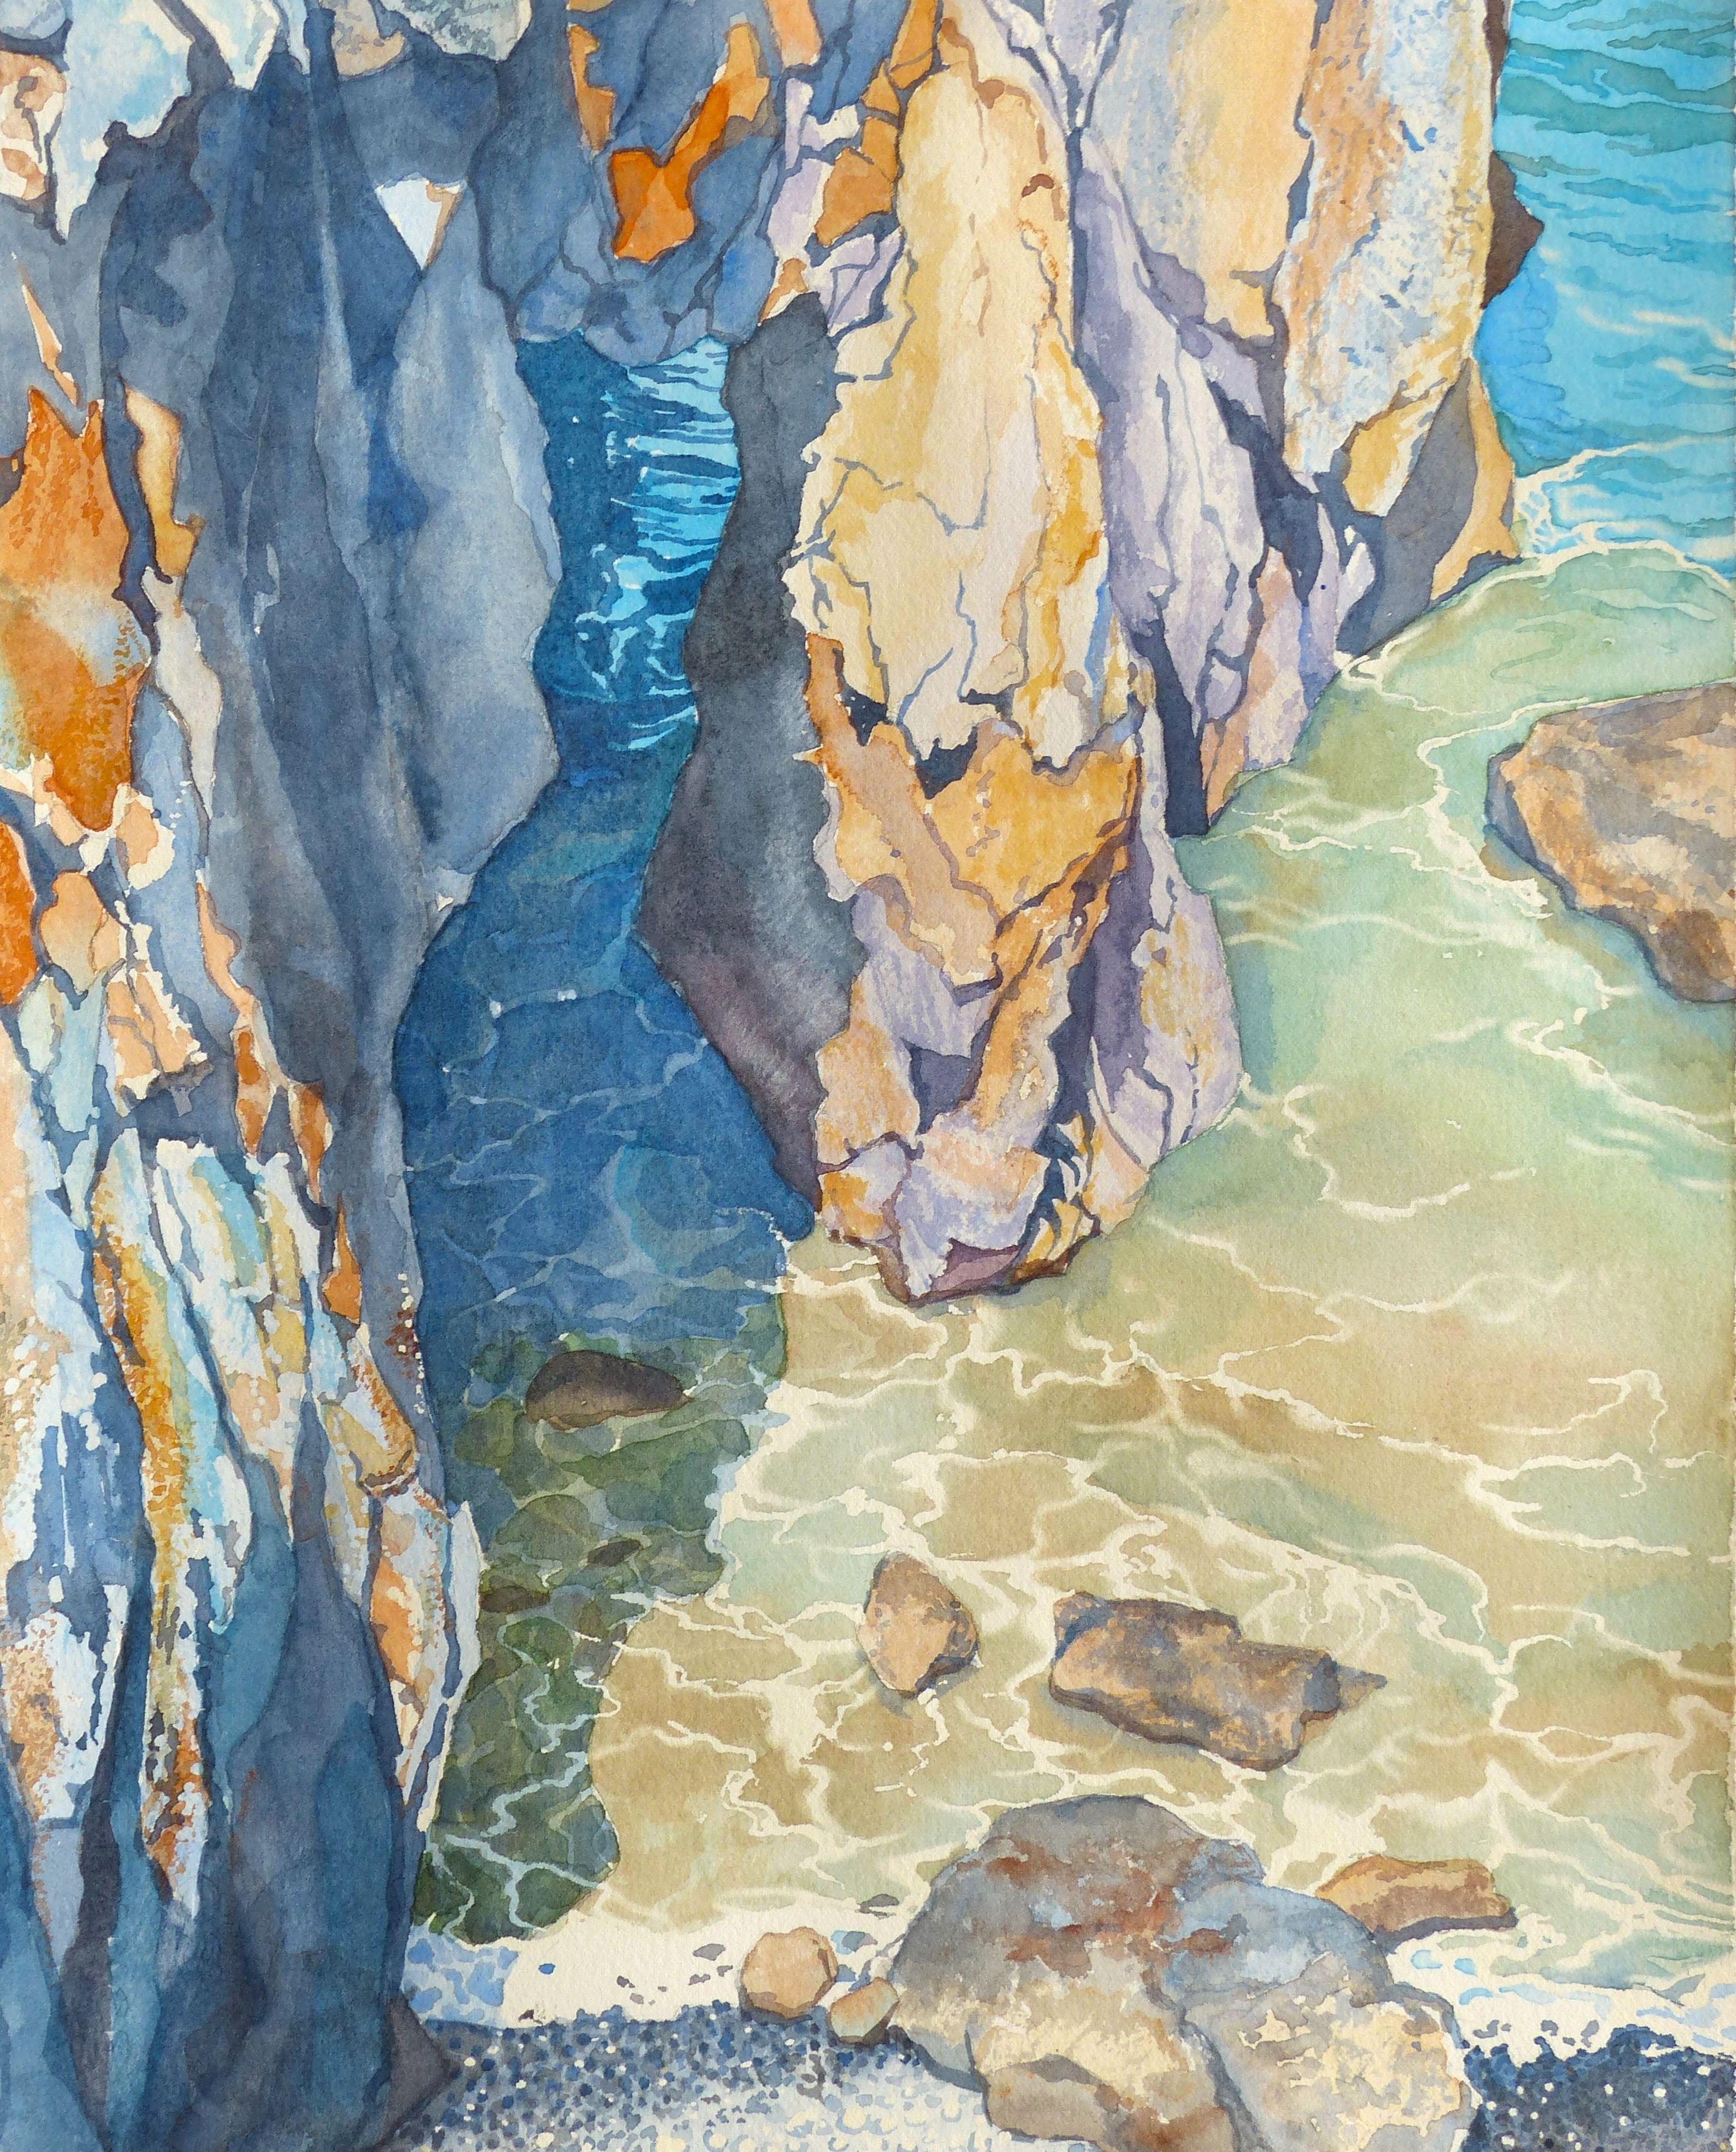 Wild Cove, Painting, Watercolor on Watercolor Paper - Art by Leslie White